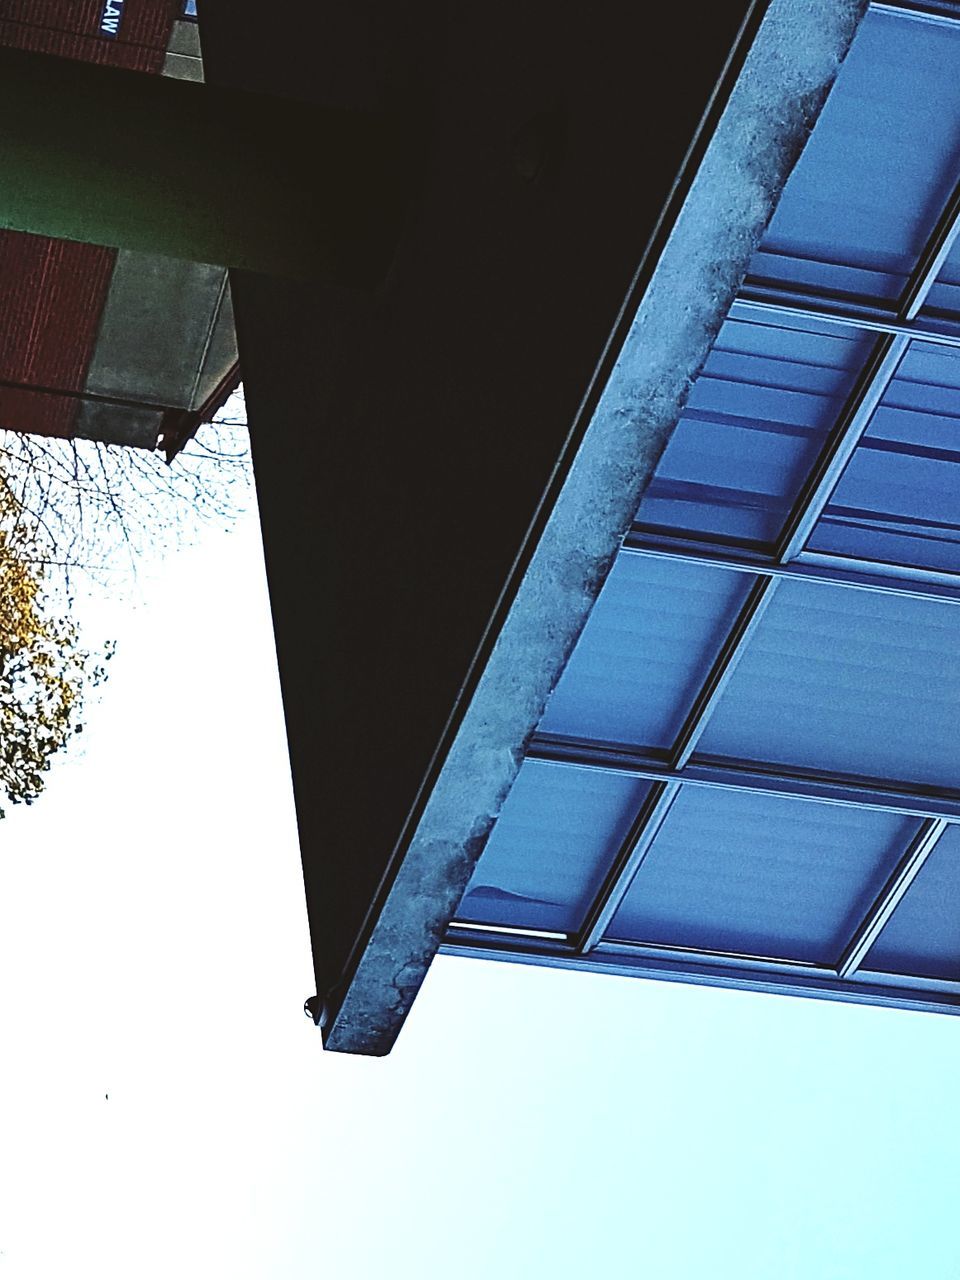 architecture, sky, low angle view, built structure, building exterior, no people, nature, day, building, blue, window, glass - material, roof, outdoors, clear sky, reflection, pattern, directly below, tree, glass